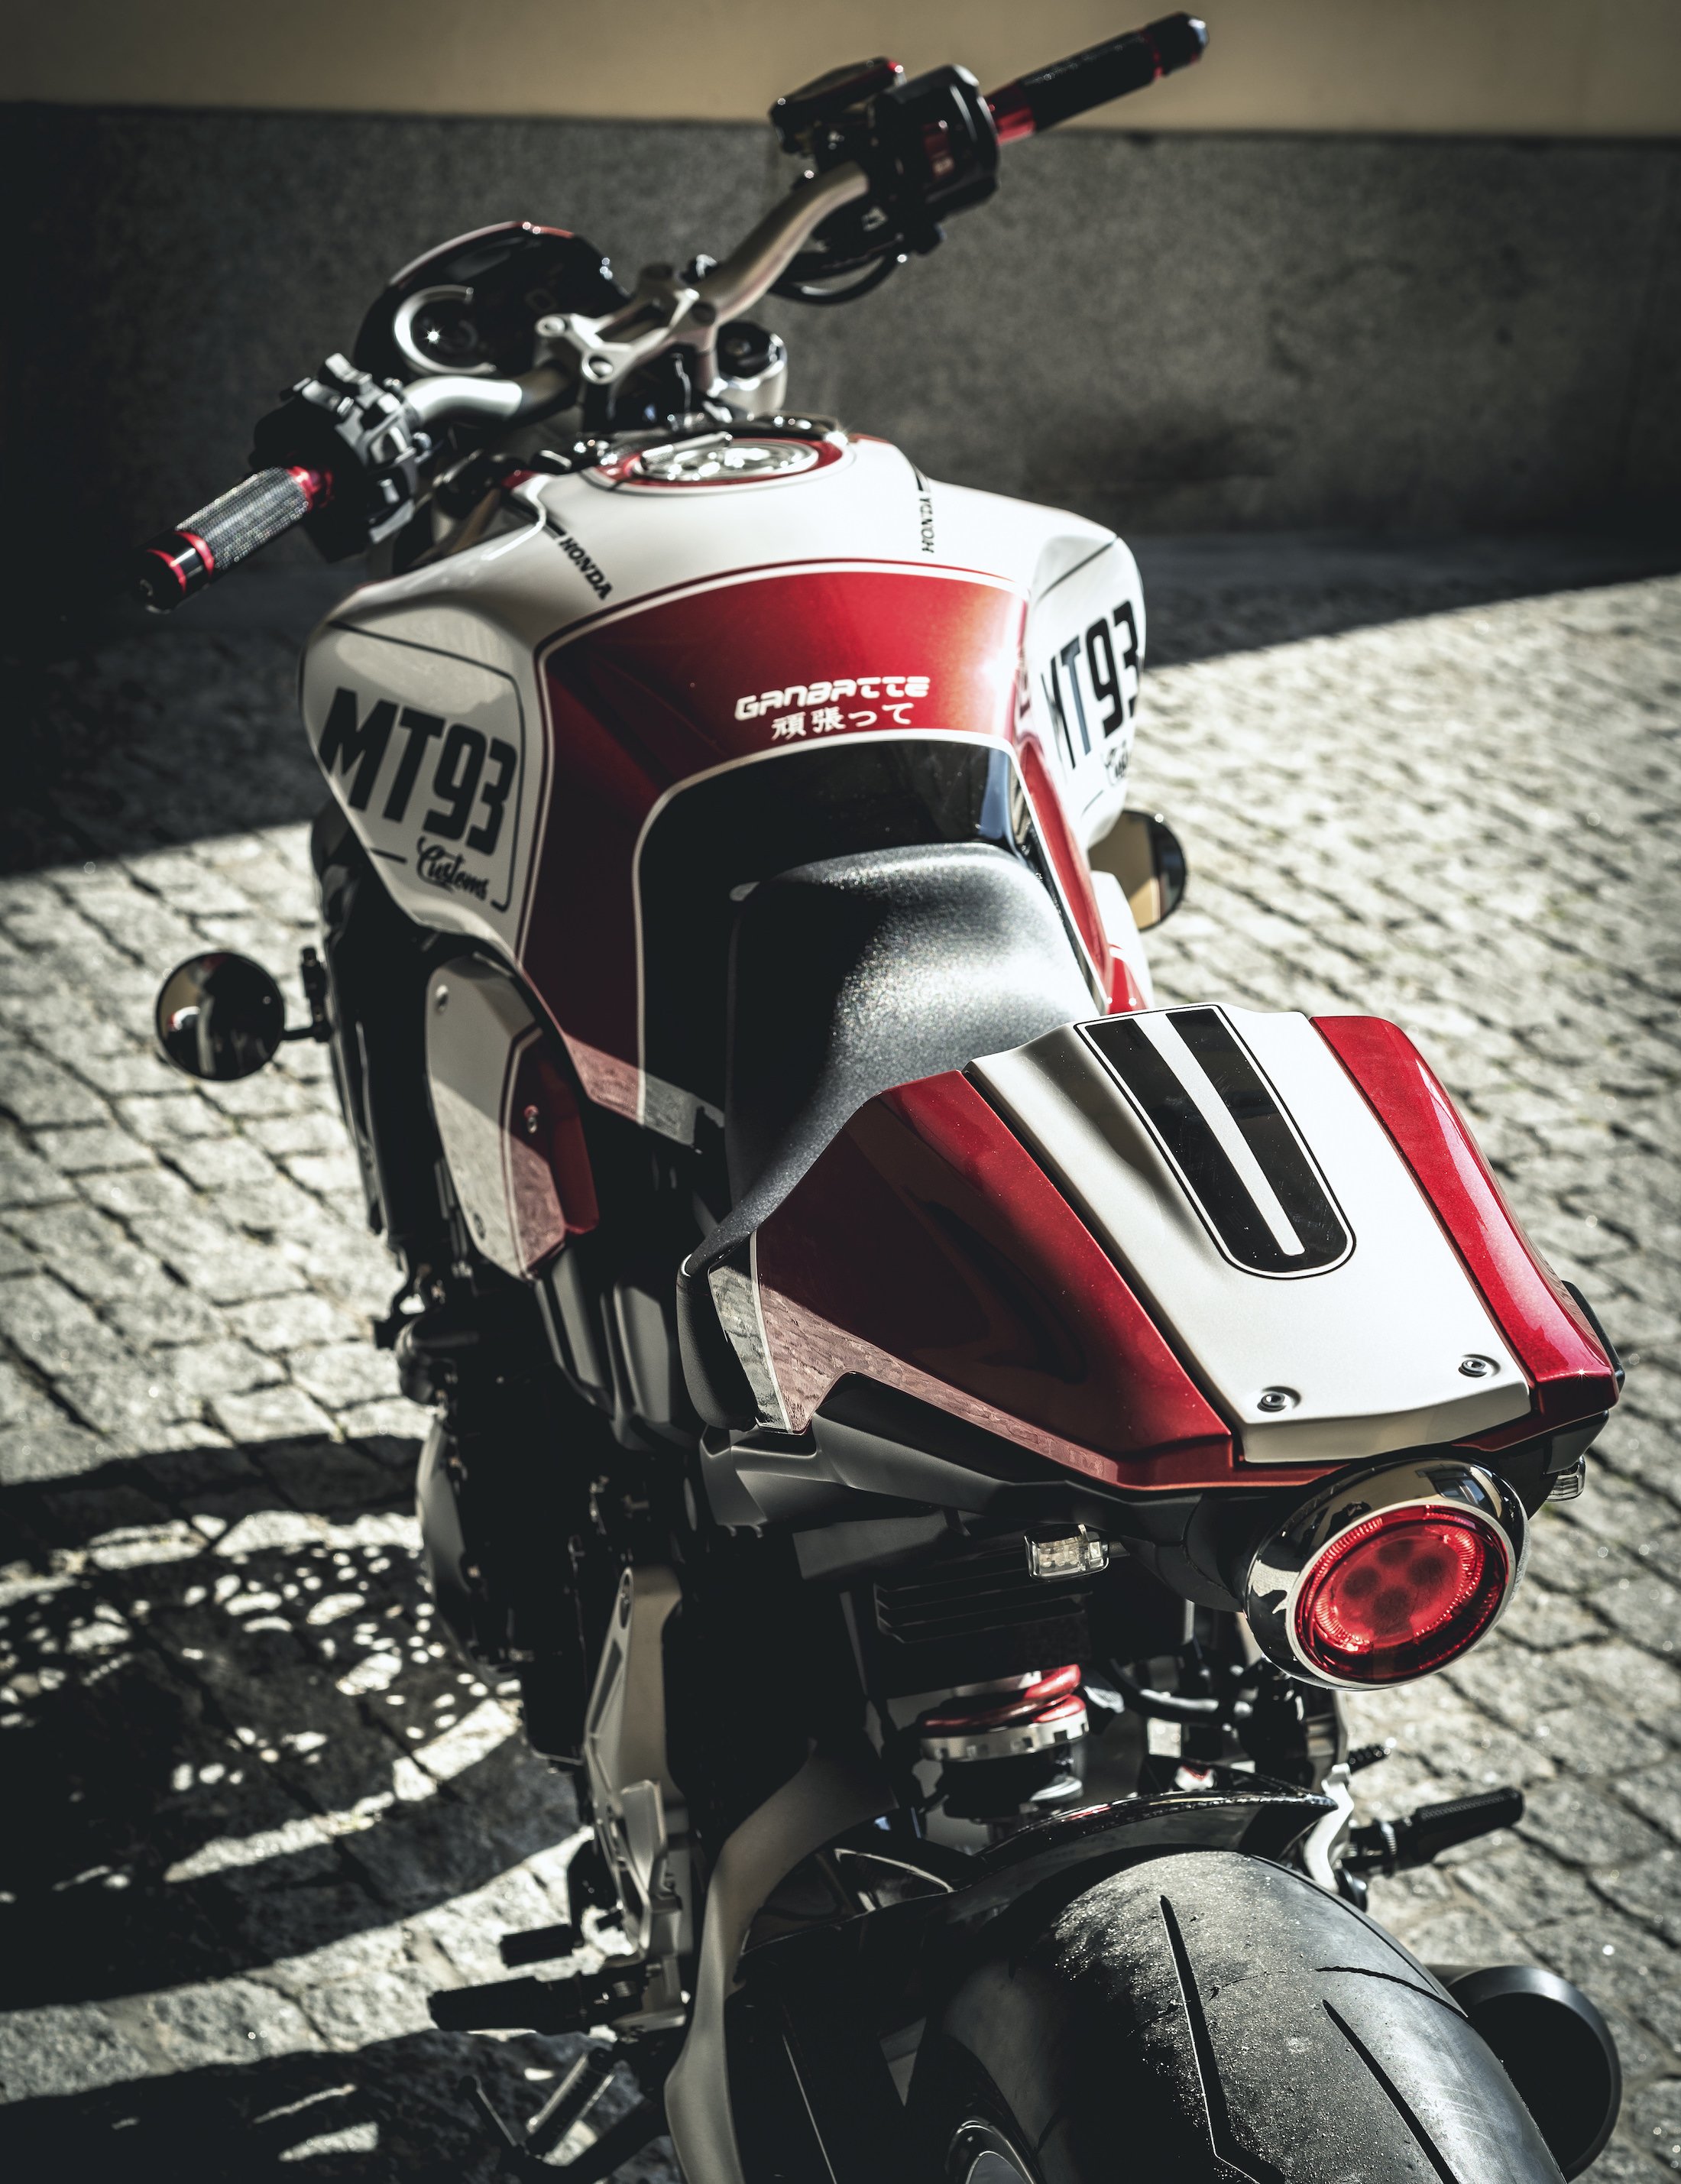 The Honda CB1000R - 13 New Customs From Spain, Portugal, and the ...